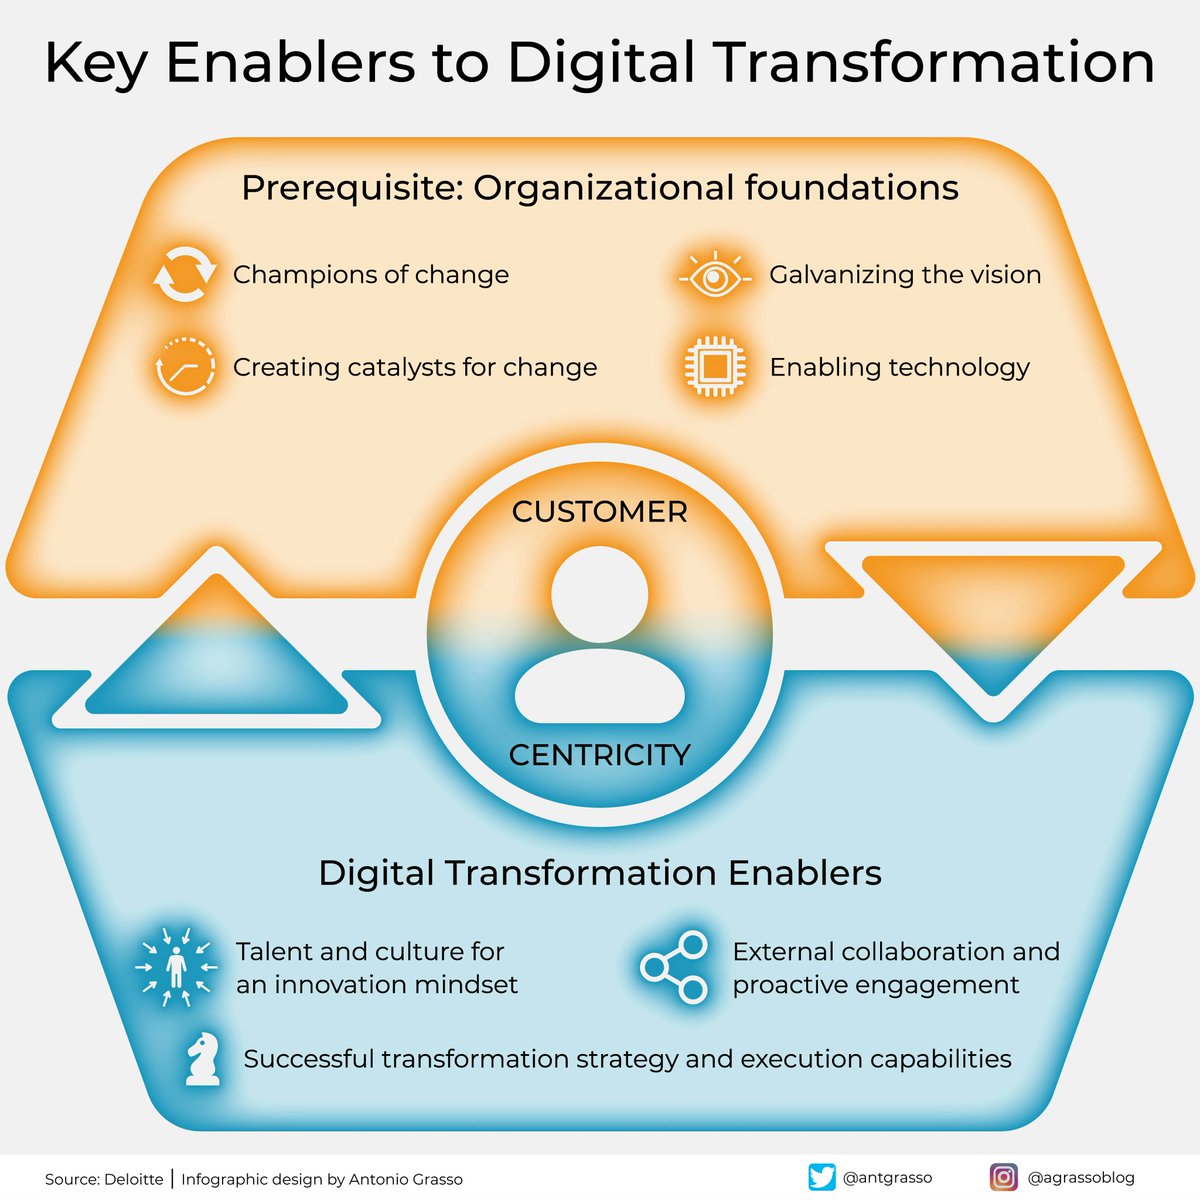 The promise of digital can be realized if we see technology as essential, but not the only enabler. Customer centricity as a strategic element is critical, and talent, culture, strategy and collaboration are inescapable. Microblog and social design by @antgrasso